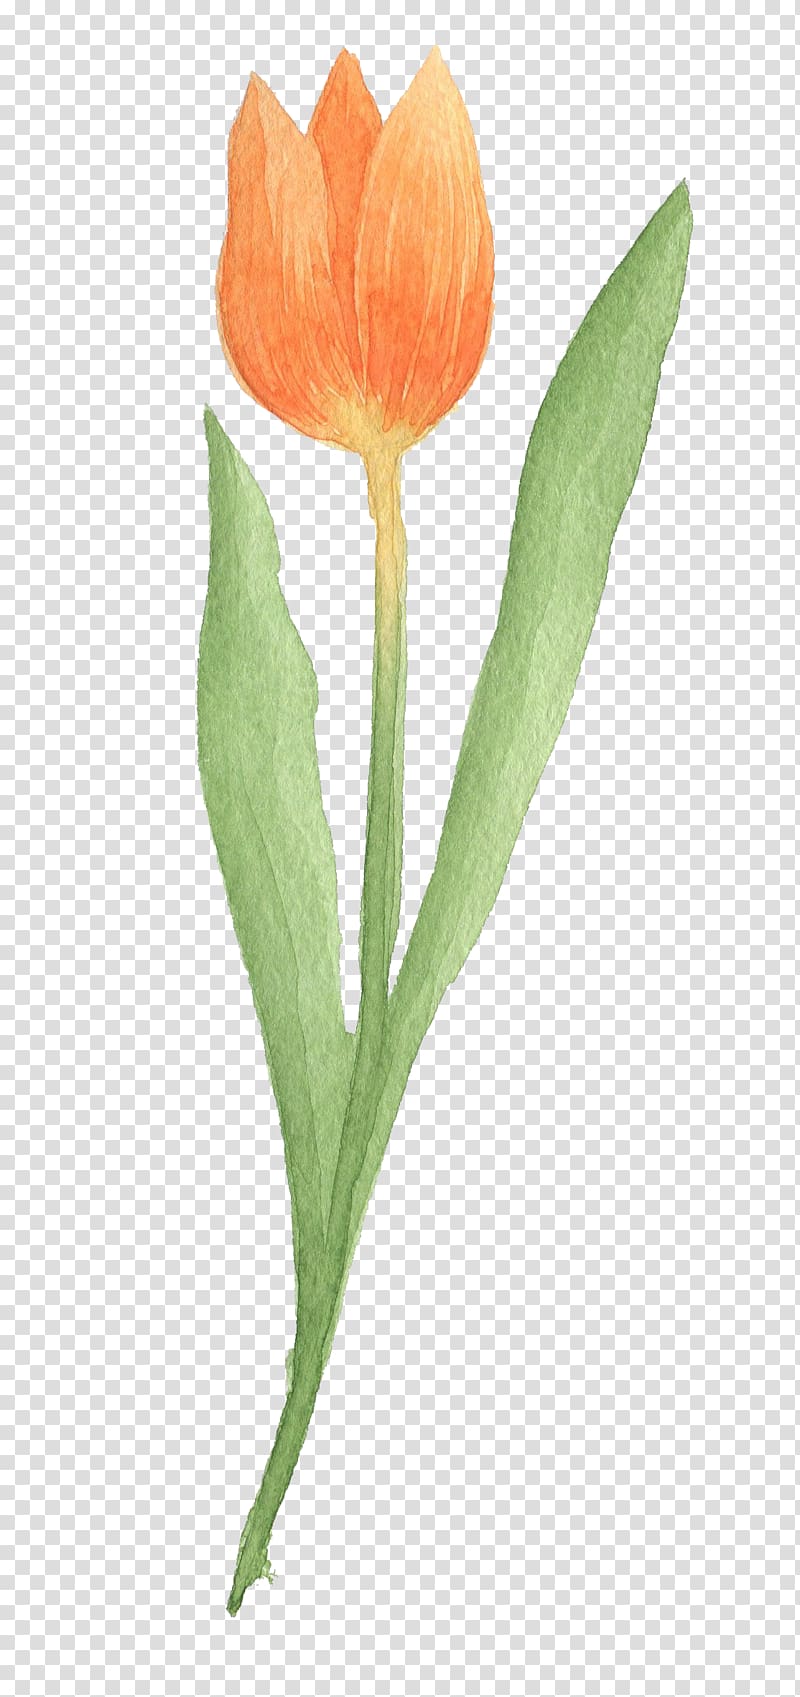 Tulip Google Watercolor painting, Yellow Tulips transparent background PNG clipart